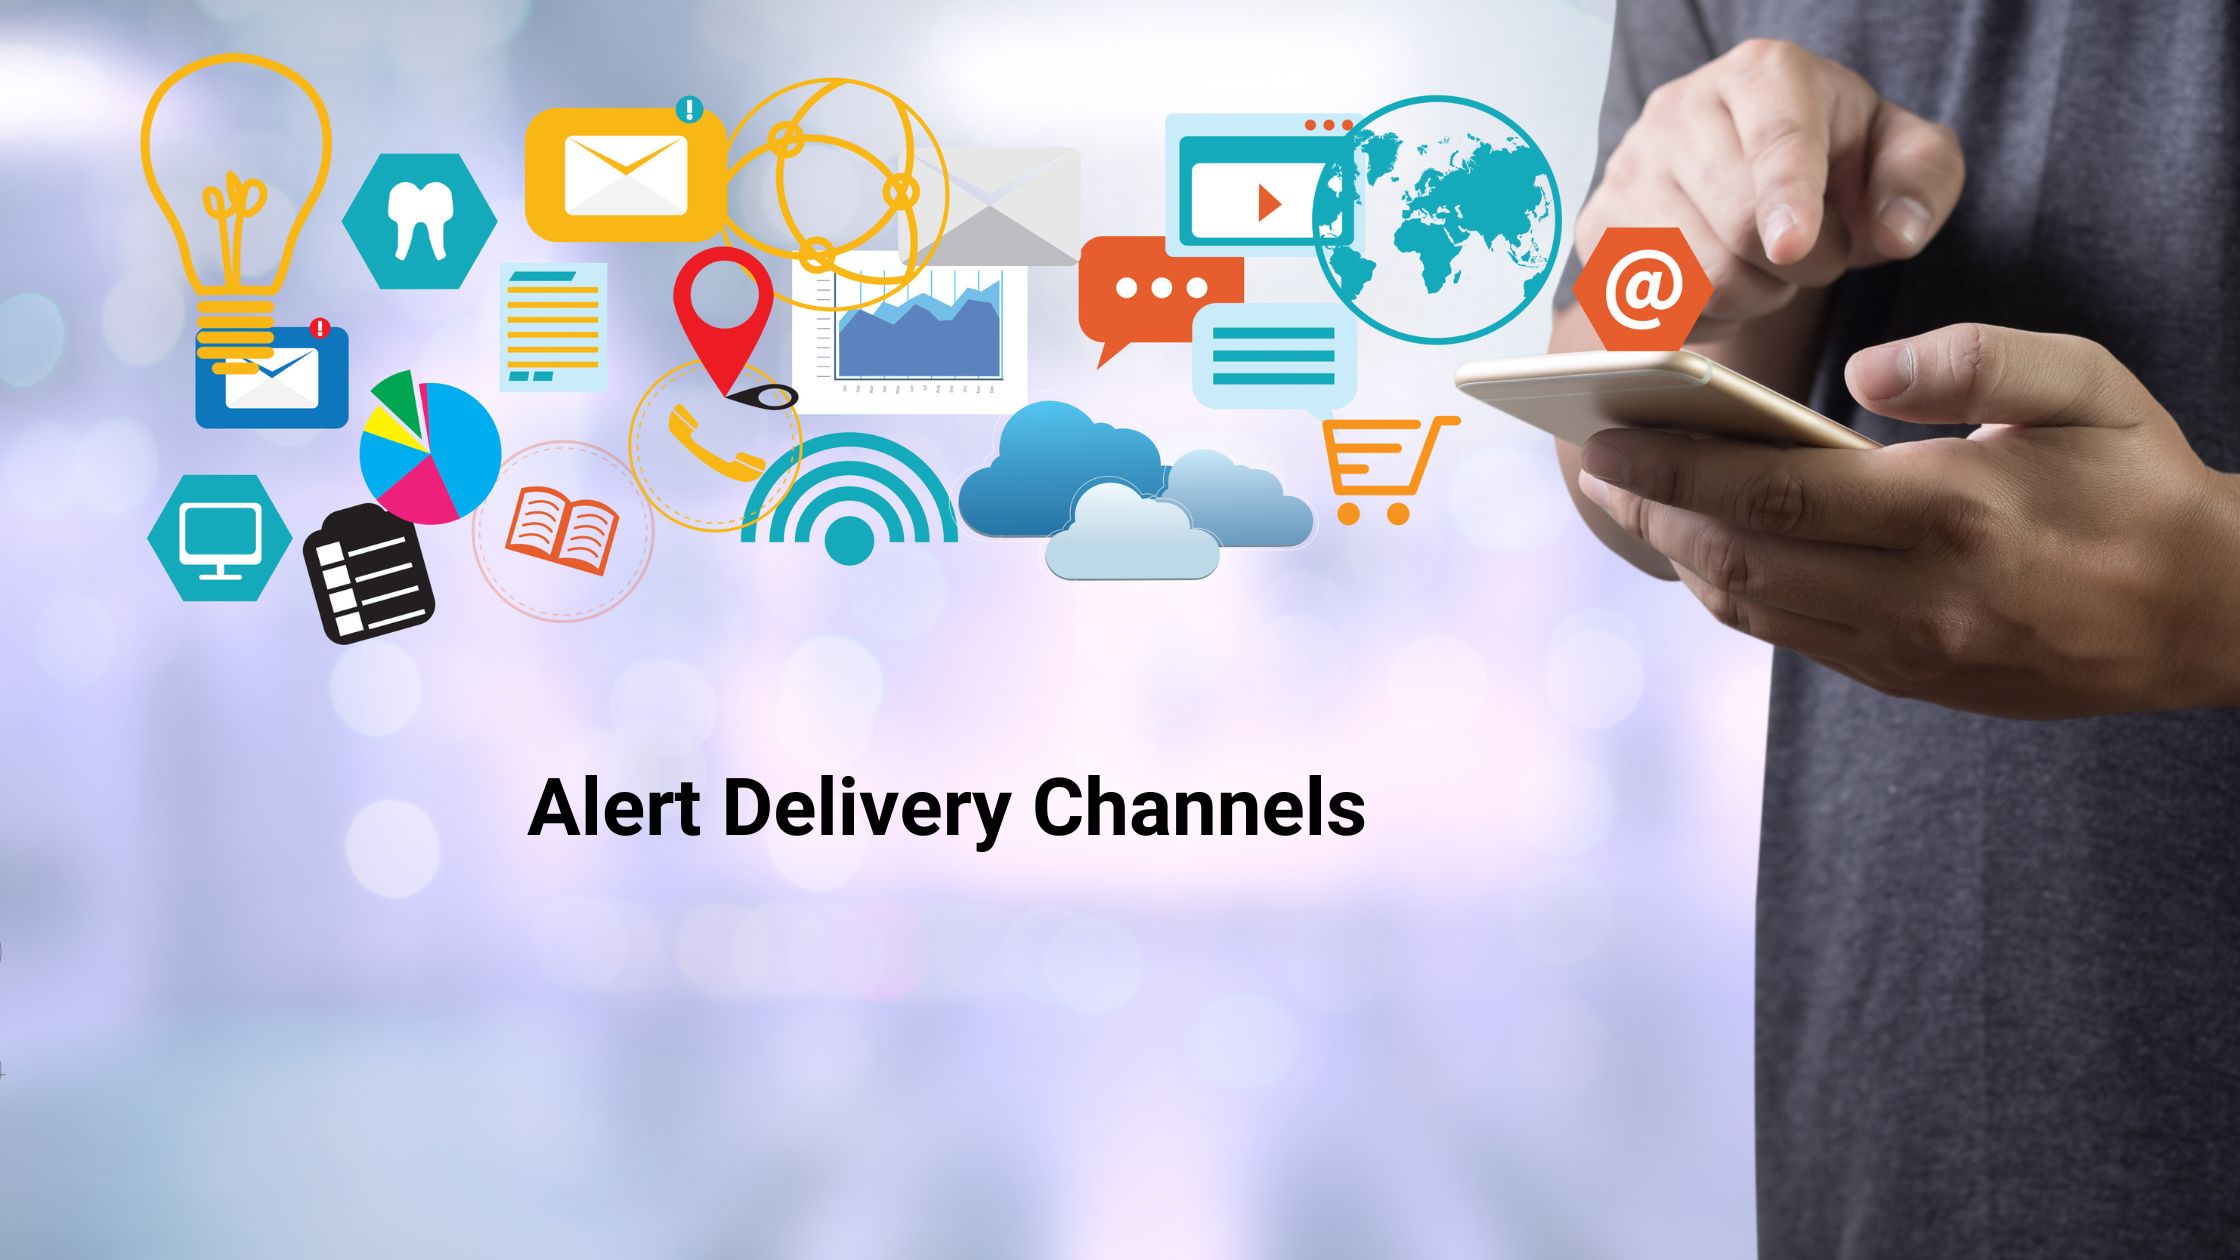 Configuring Alert Delivery Channels